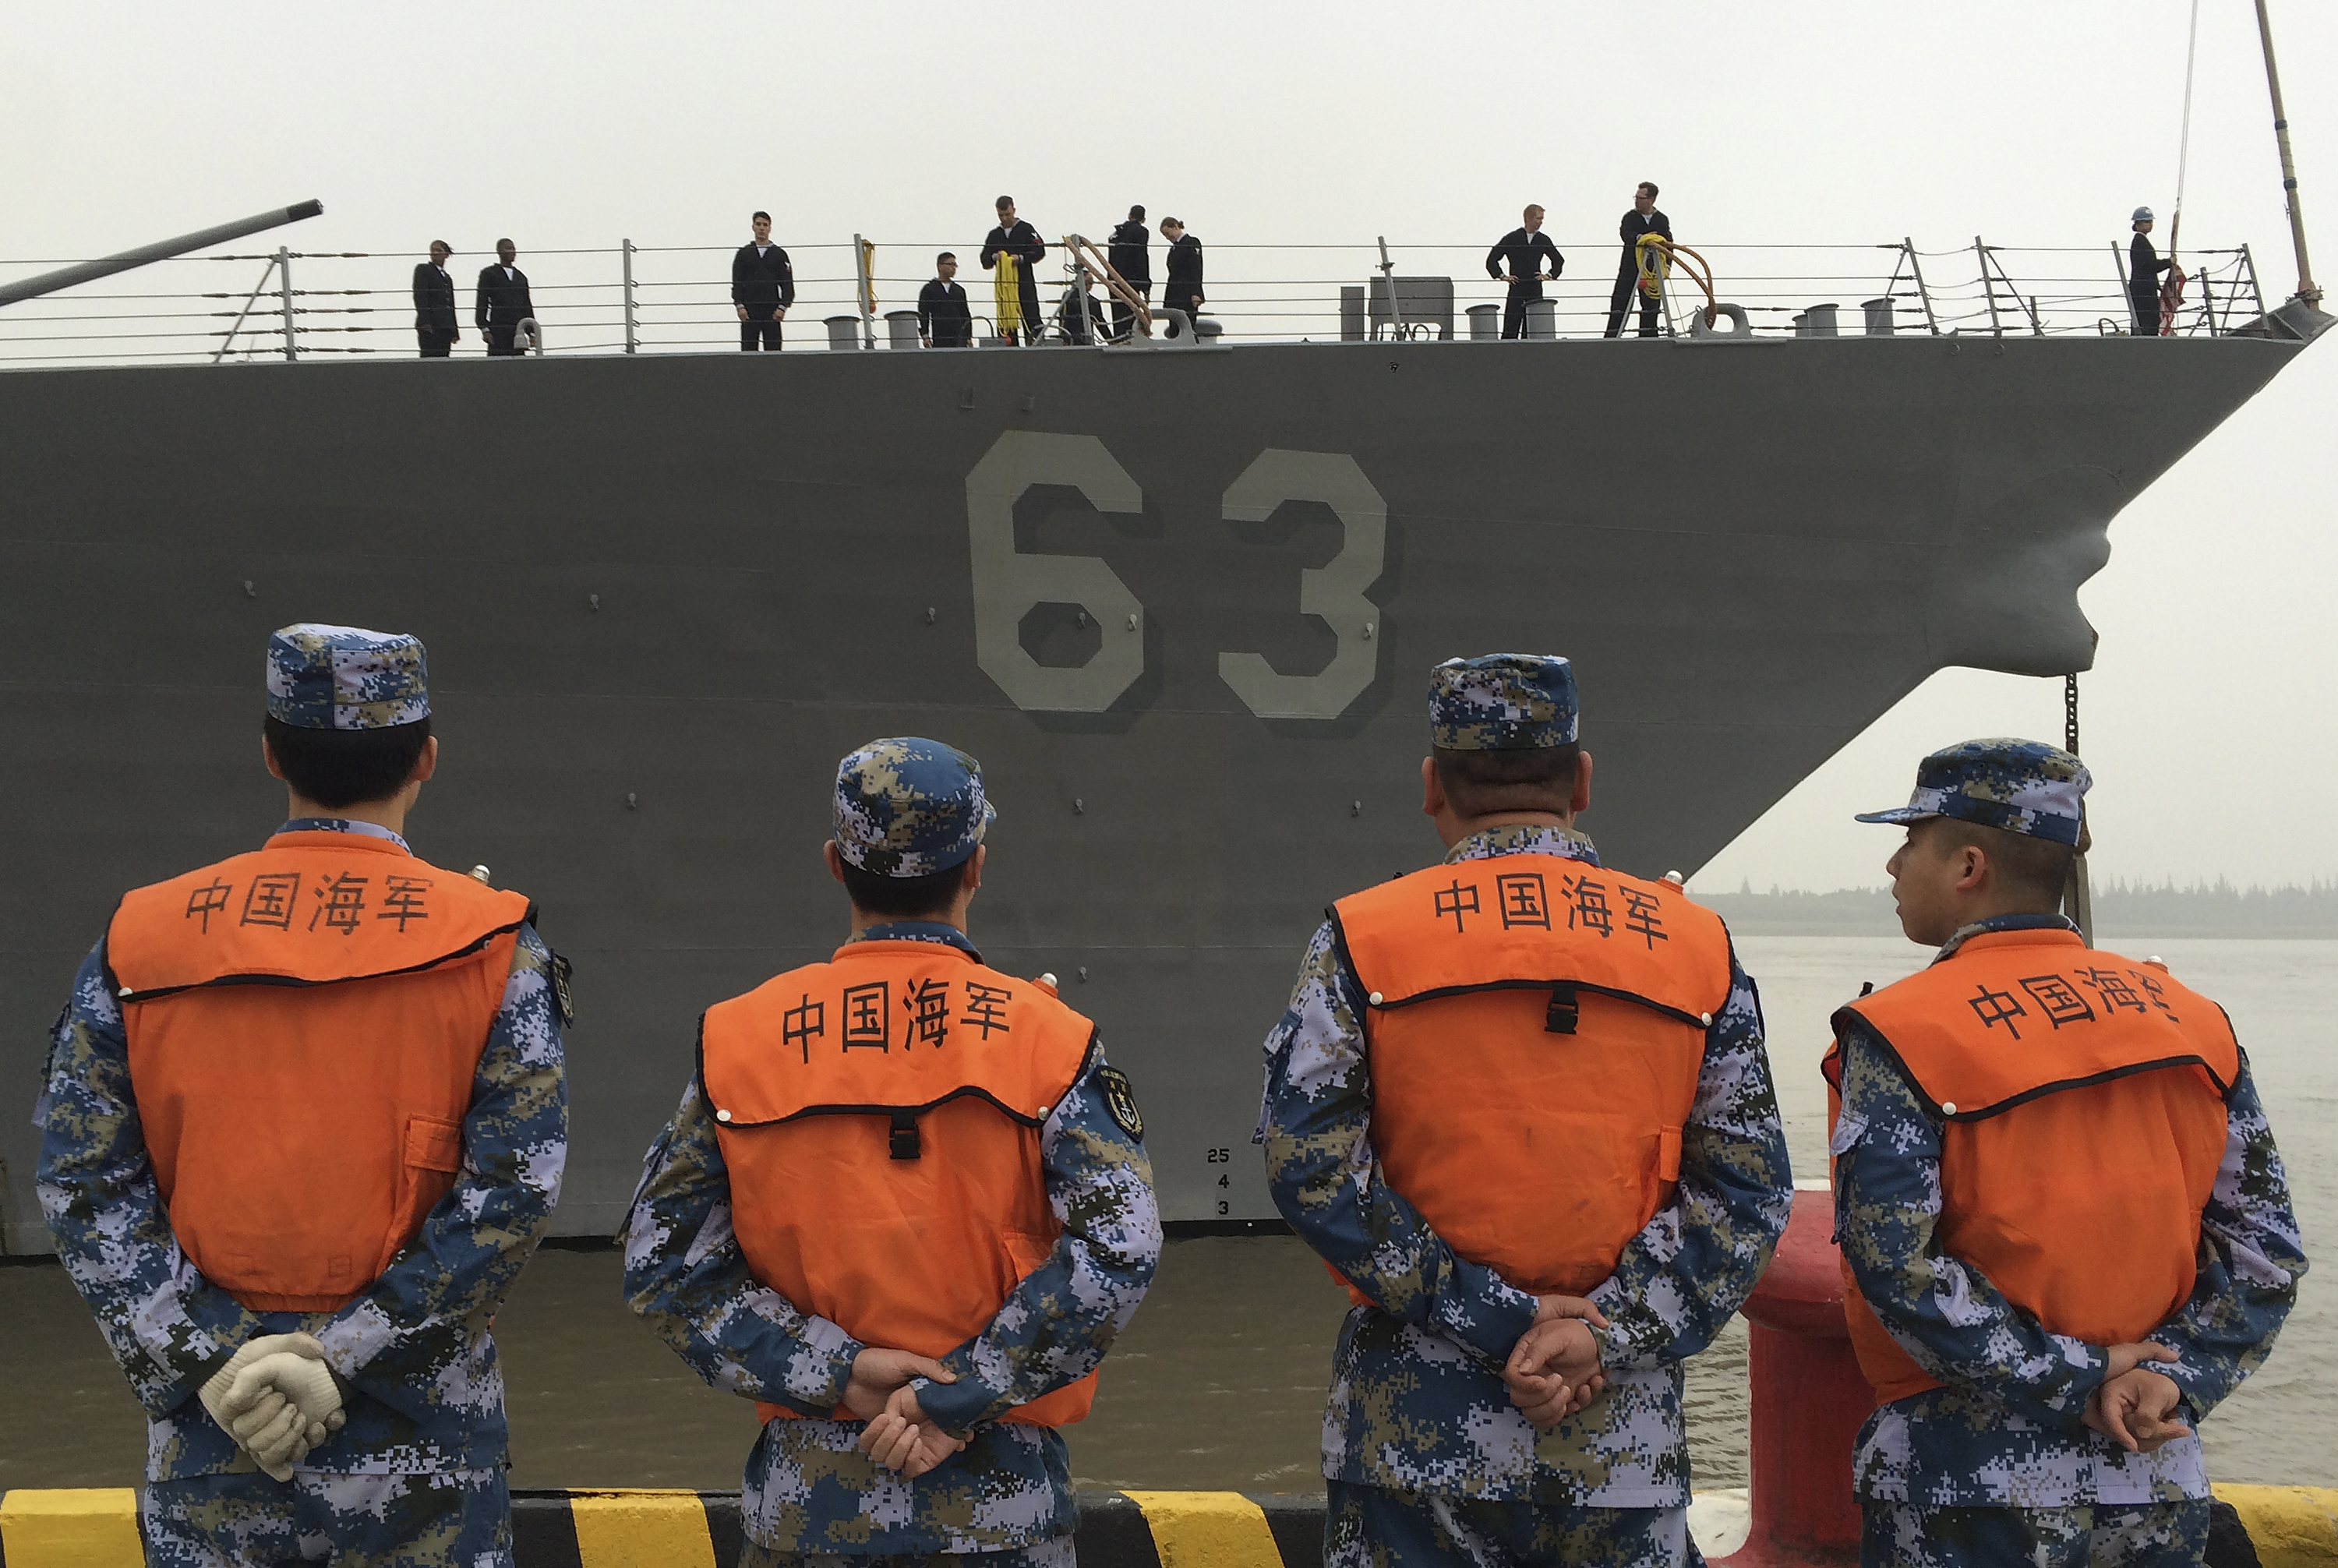 Chinese Navy personnel stand watch the guided missile destroyer USS Stethem arrives at the Shanghai International Passenger Quay for a scheduled port visit in Shanghai, China, Monday, Nov. 16, 2015. A U.S. Navy destroyer docked in Shanghai on Monday in a sign that contacts between the U.S. and Chinese militaries are continuing despite tensions over the South China Sea. (AP Photo/Paul Traynor)